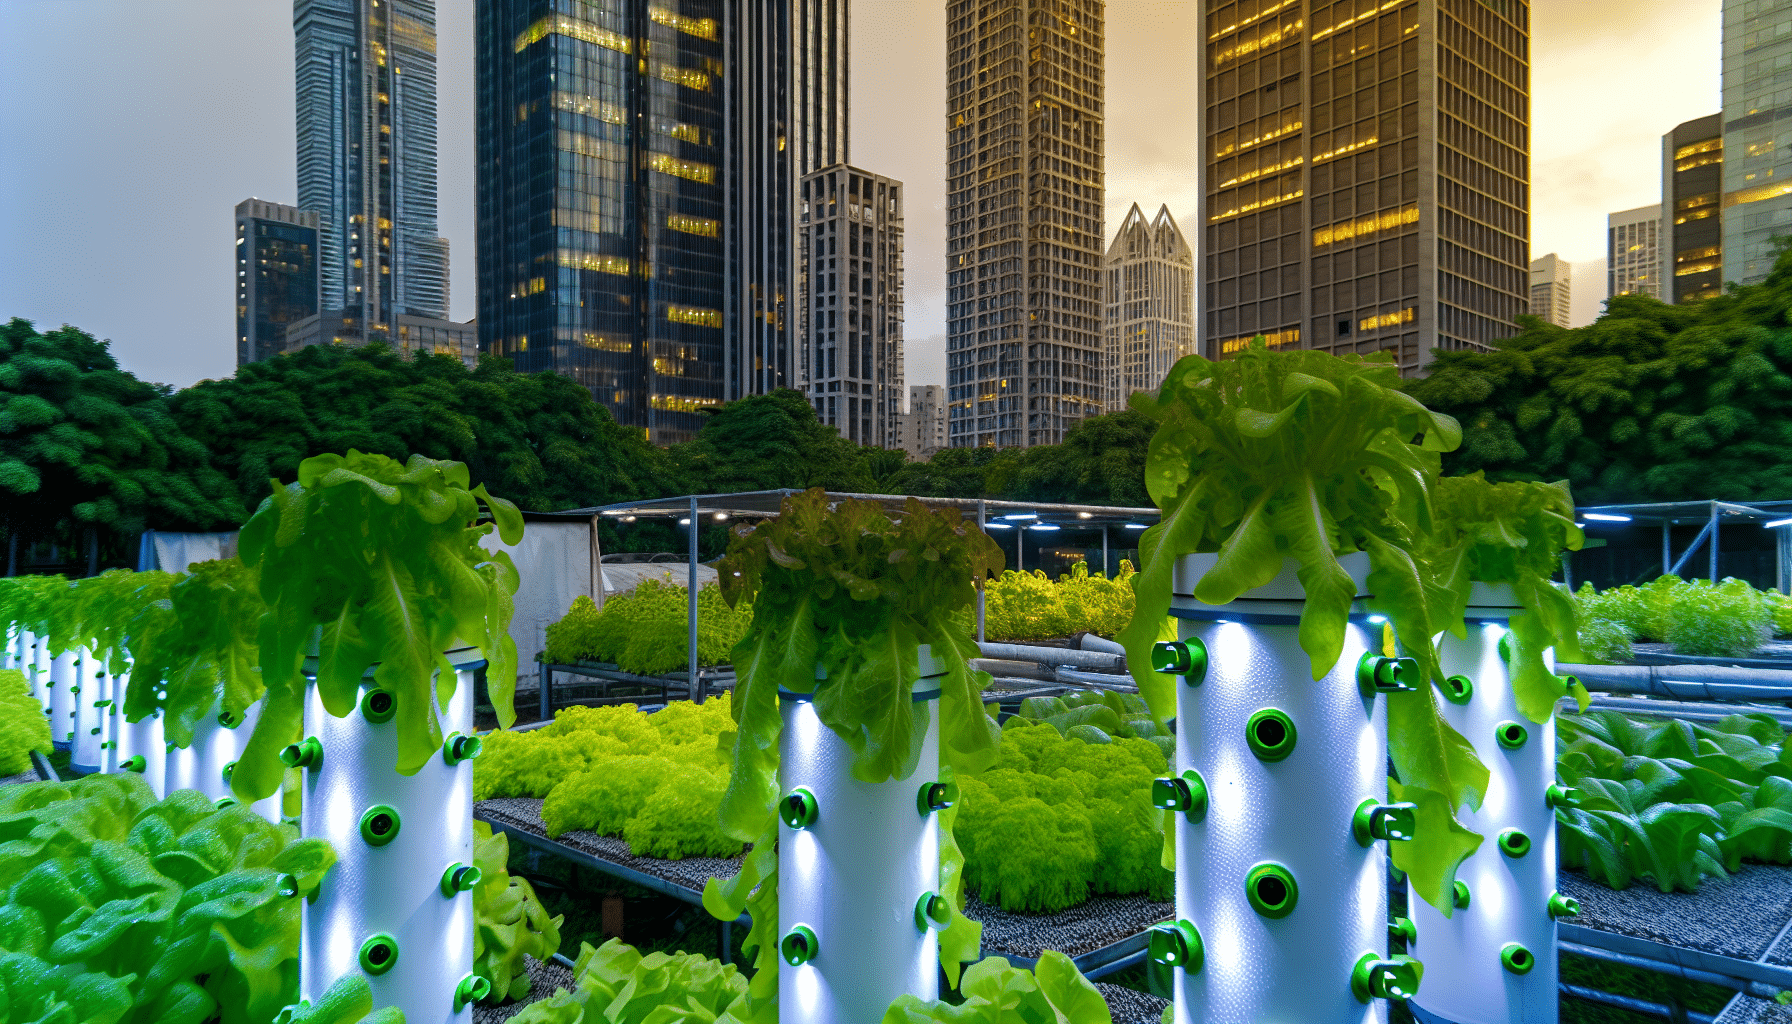 Aeroponic tower with LED lights in urban setting